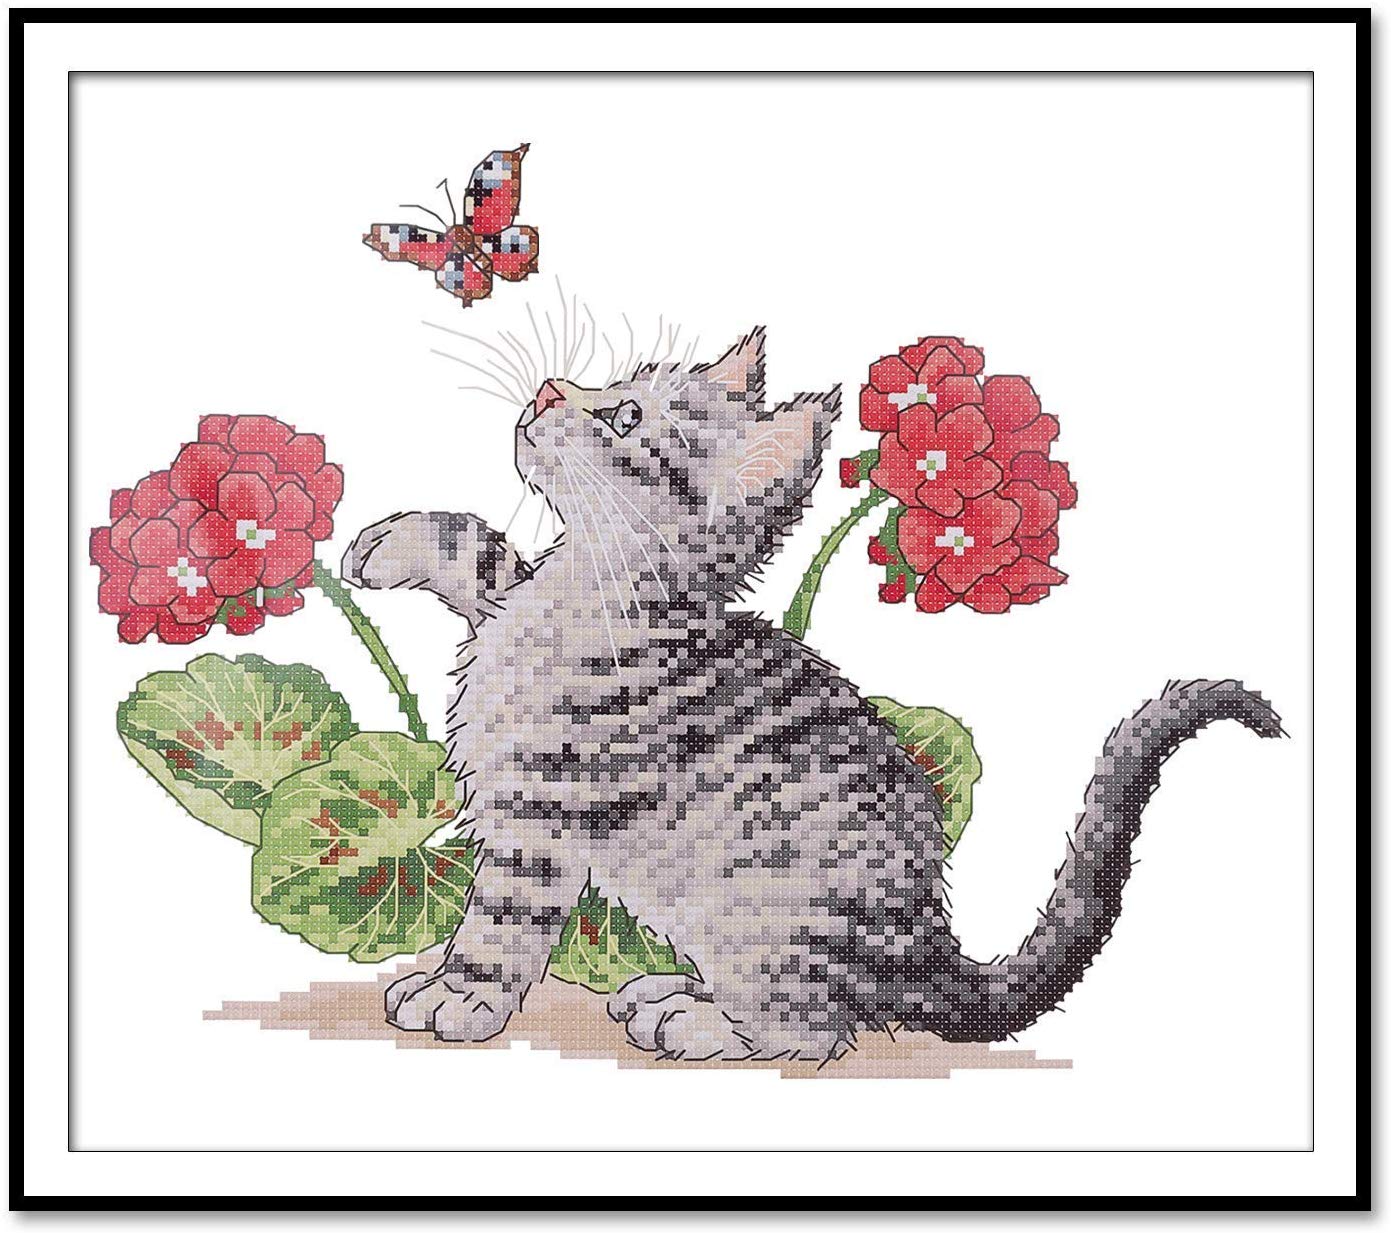 cRAFTILOO cats cross stitch kits for beginners. 5 stamped cross